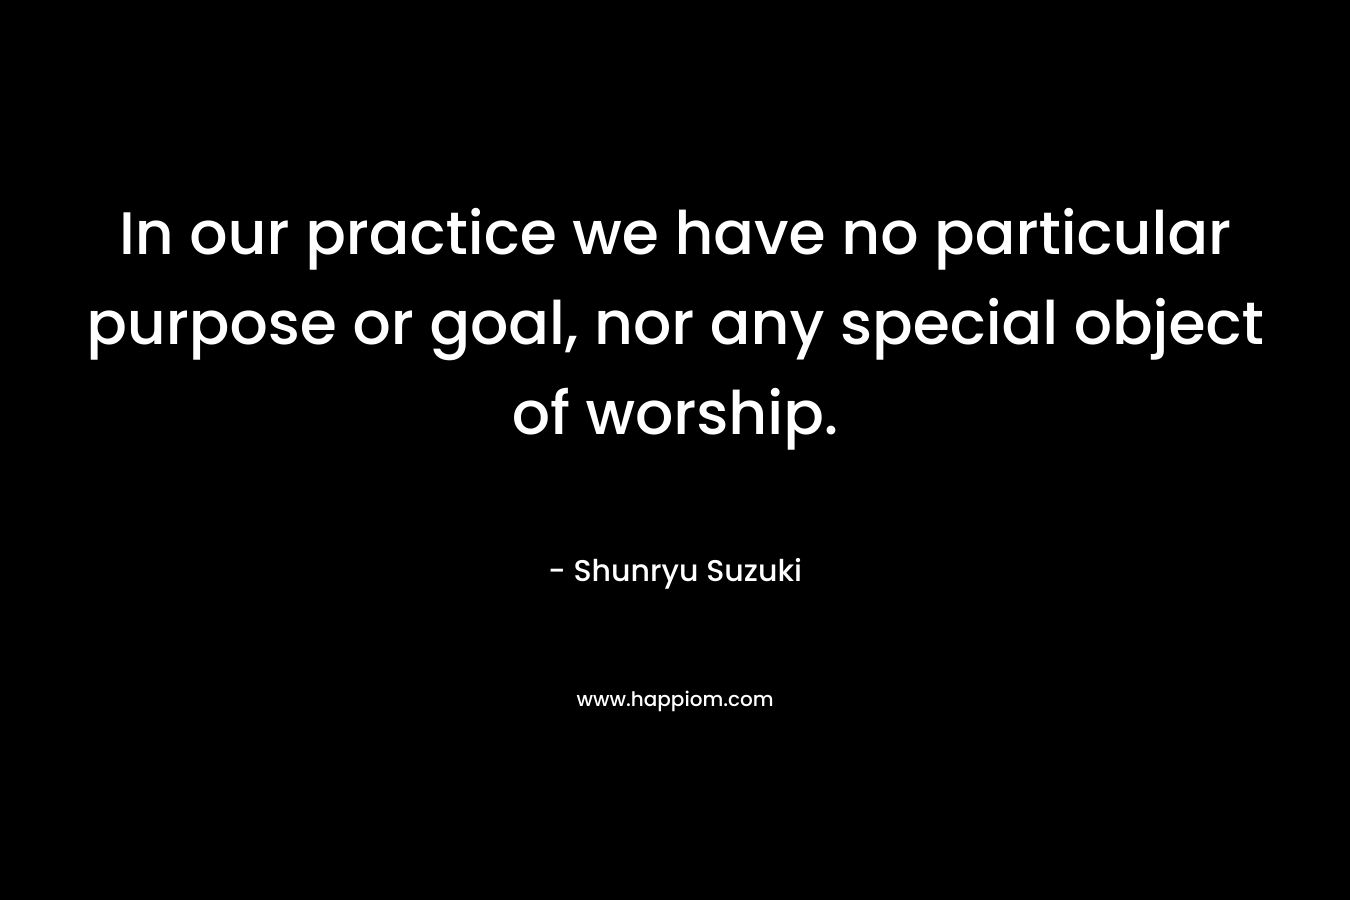 In our practice we have no particular purpose or goal, nor any special object of worship. – Shunryu Suzuki